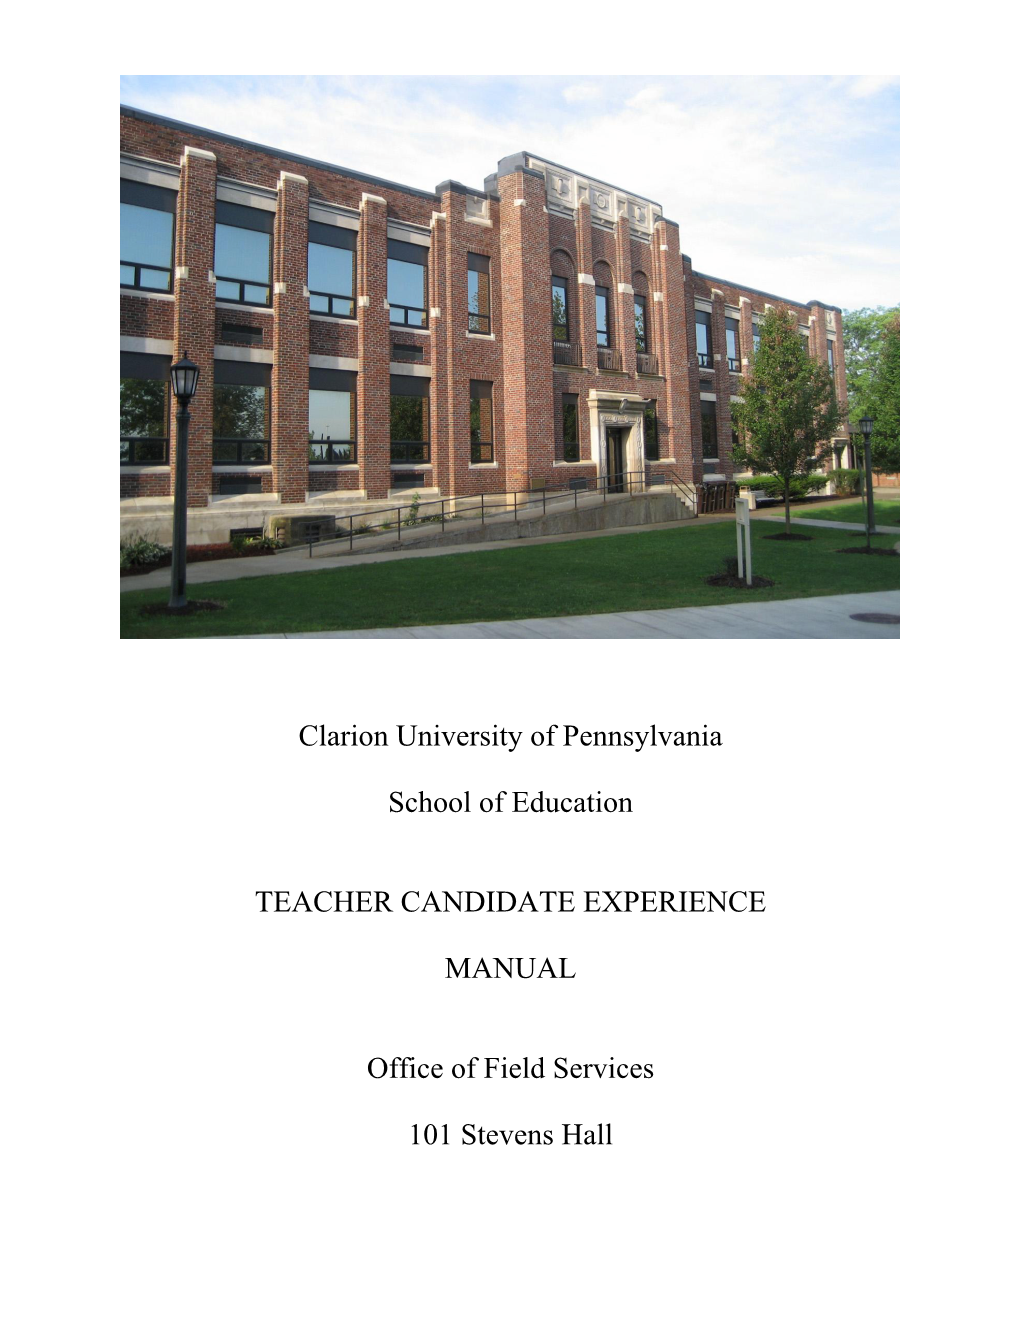 Clarion University of Pennsylvania School of Education Teacher Candidate Experience Manual